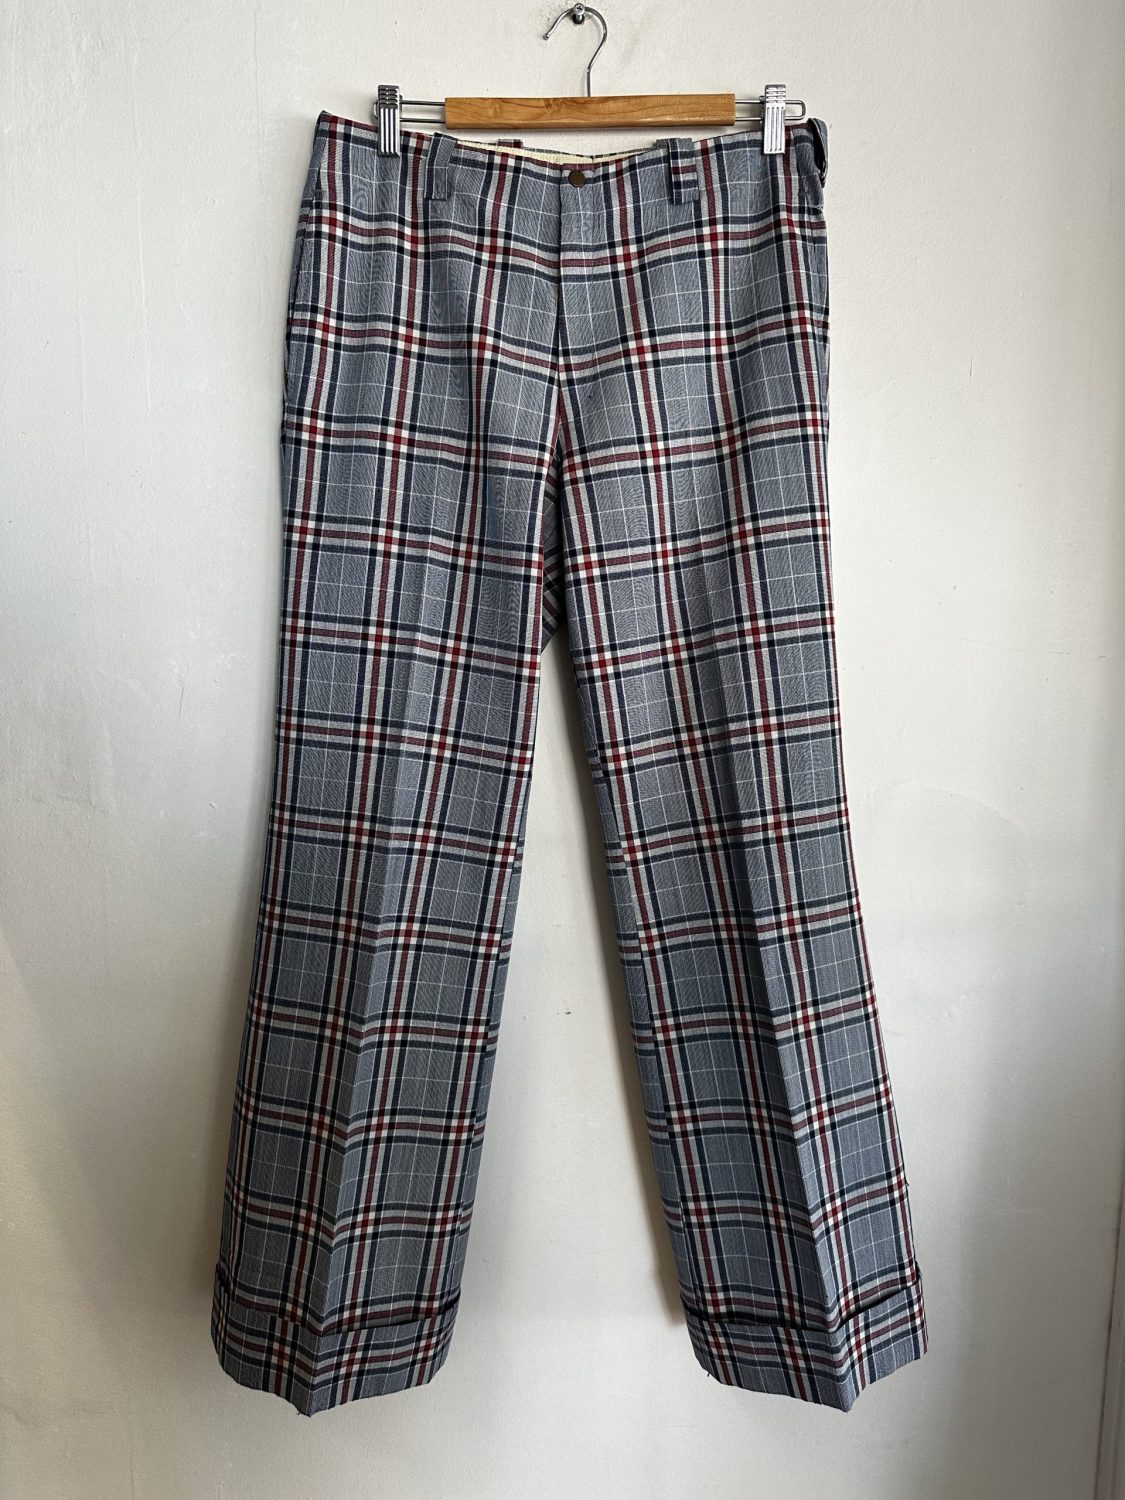 AUTHENTIC 1970s BLUE/RED/ WHITE CHECKED FLARED PANTS 32 INCH WAIST ...